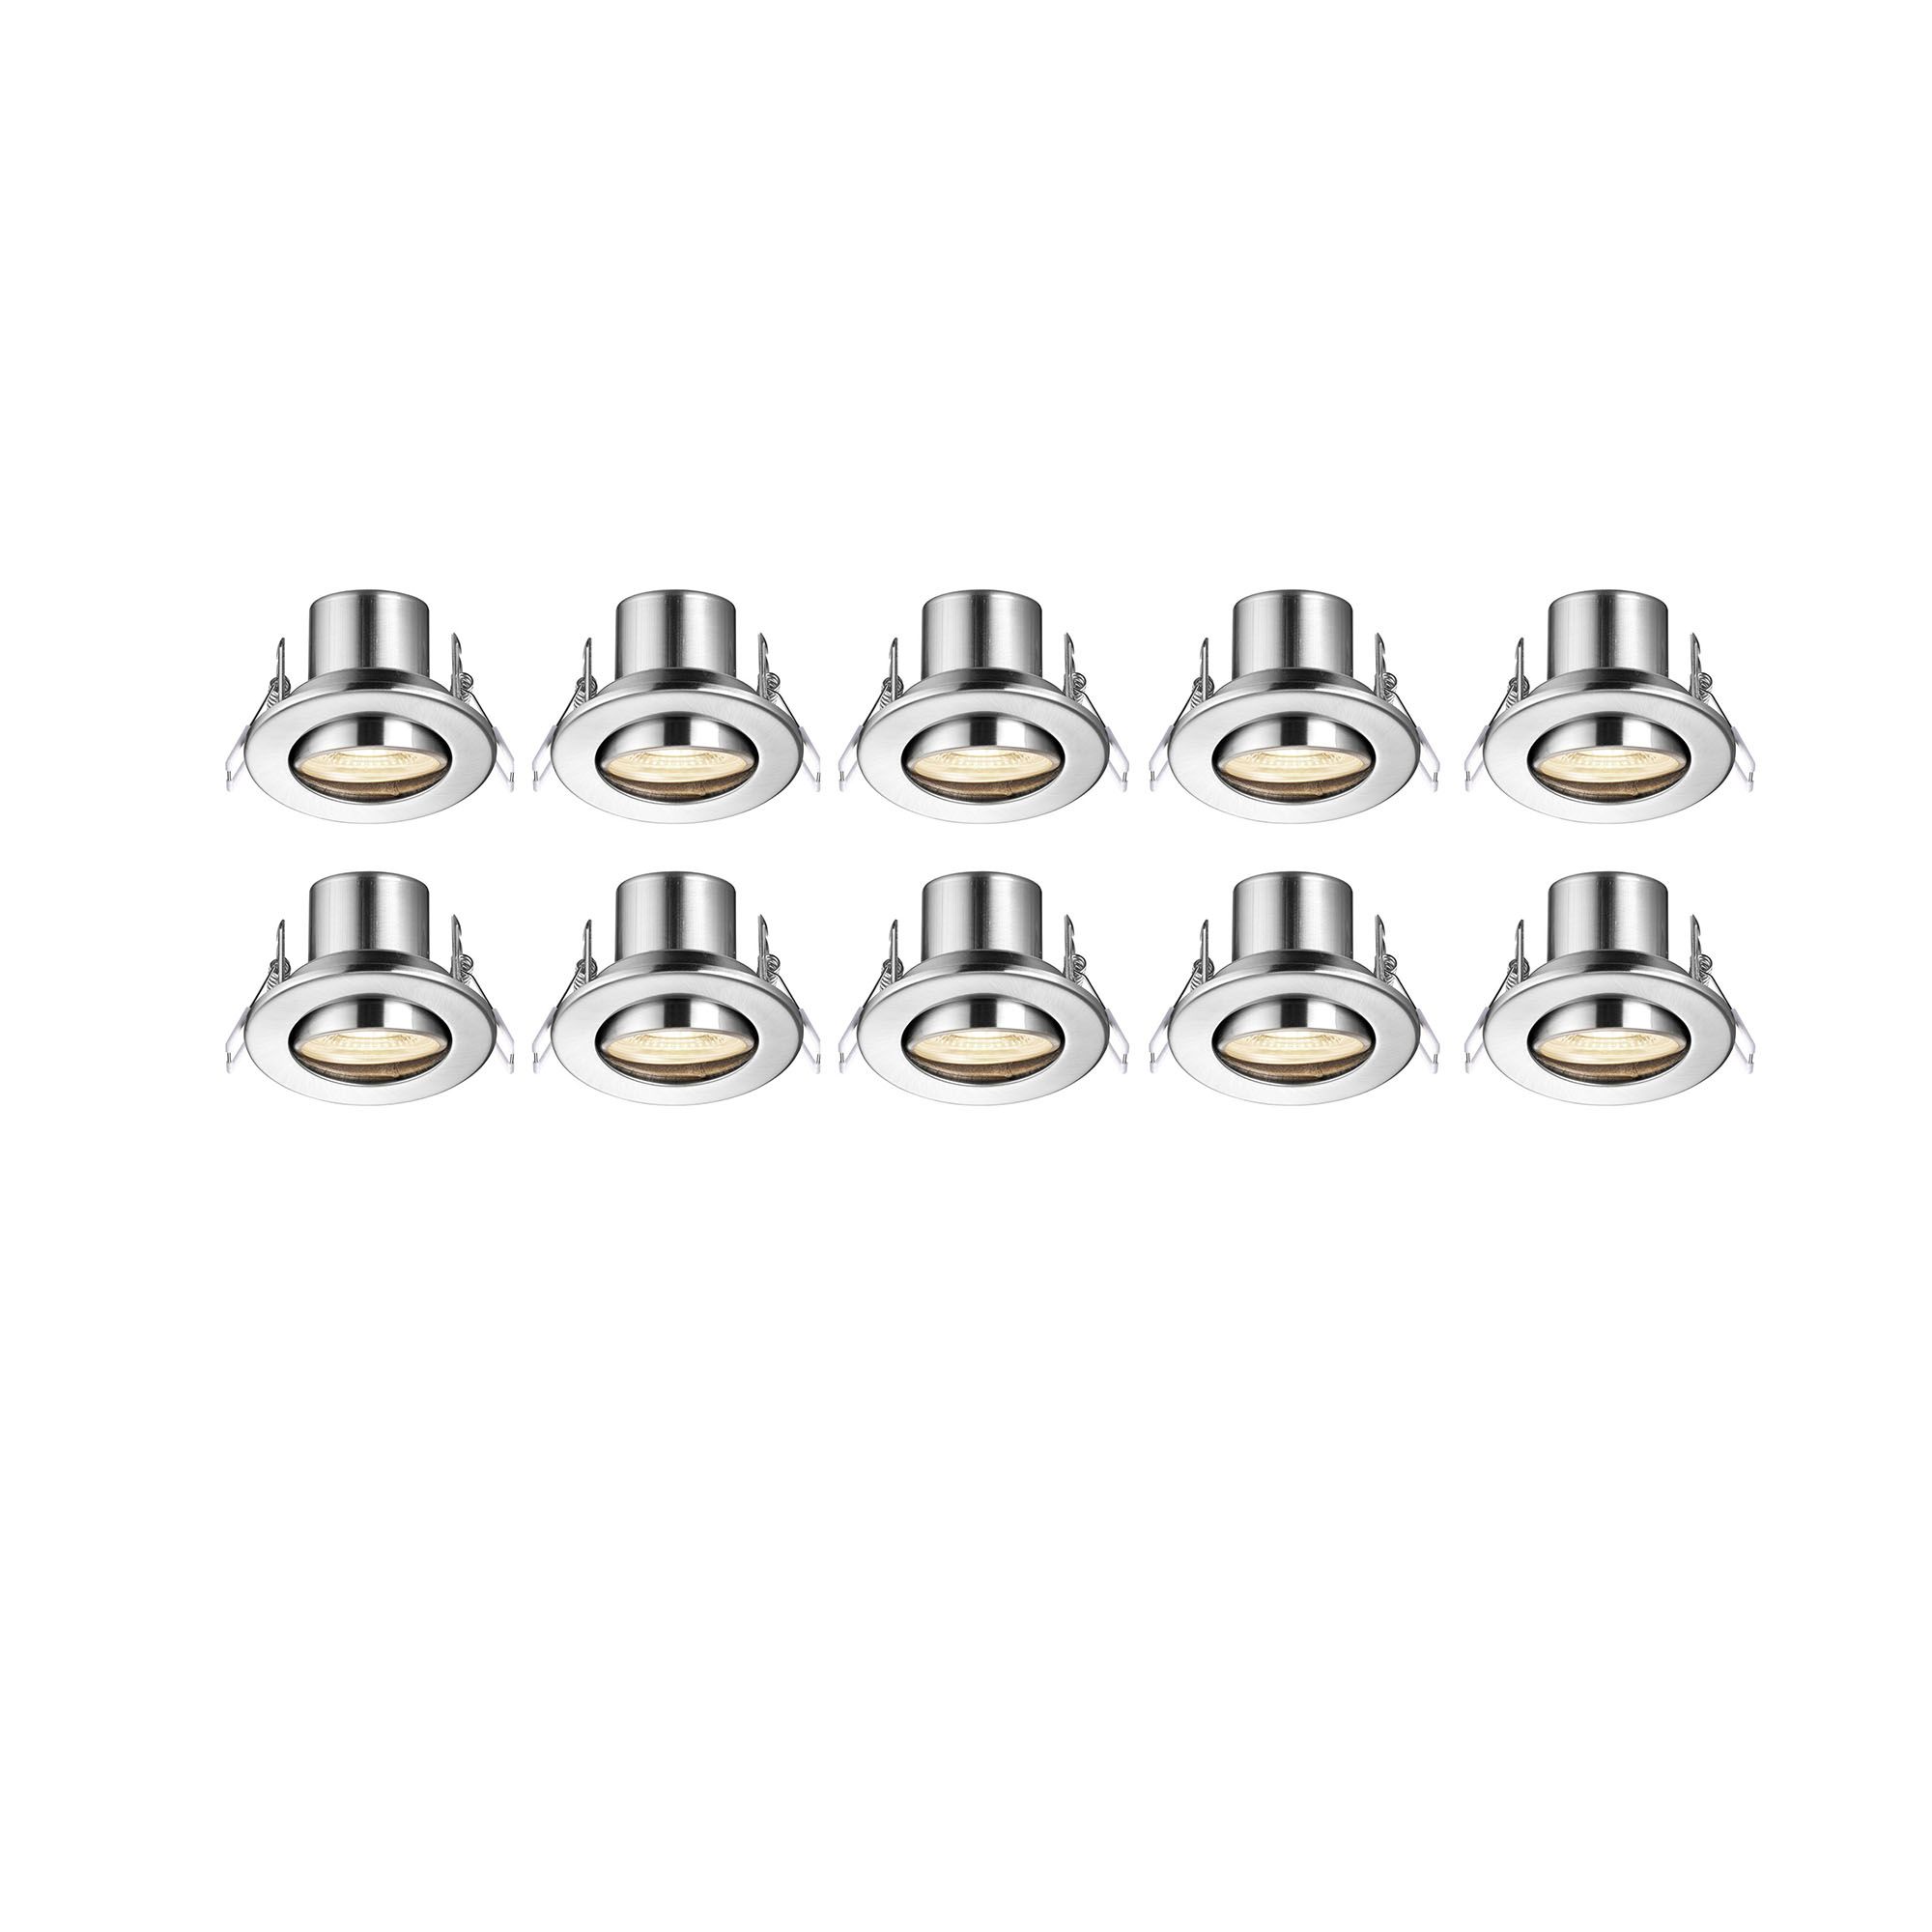 GuardECO Nickel effect Adjustable LED Warm white Downlight 6W IP20, Pack of 10